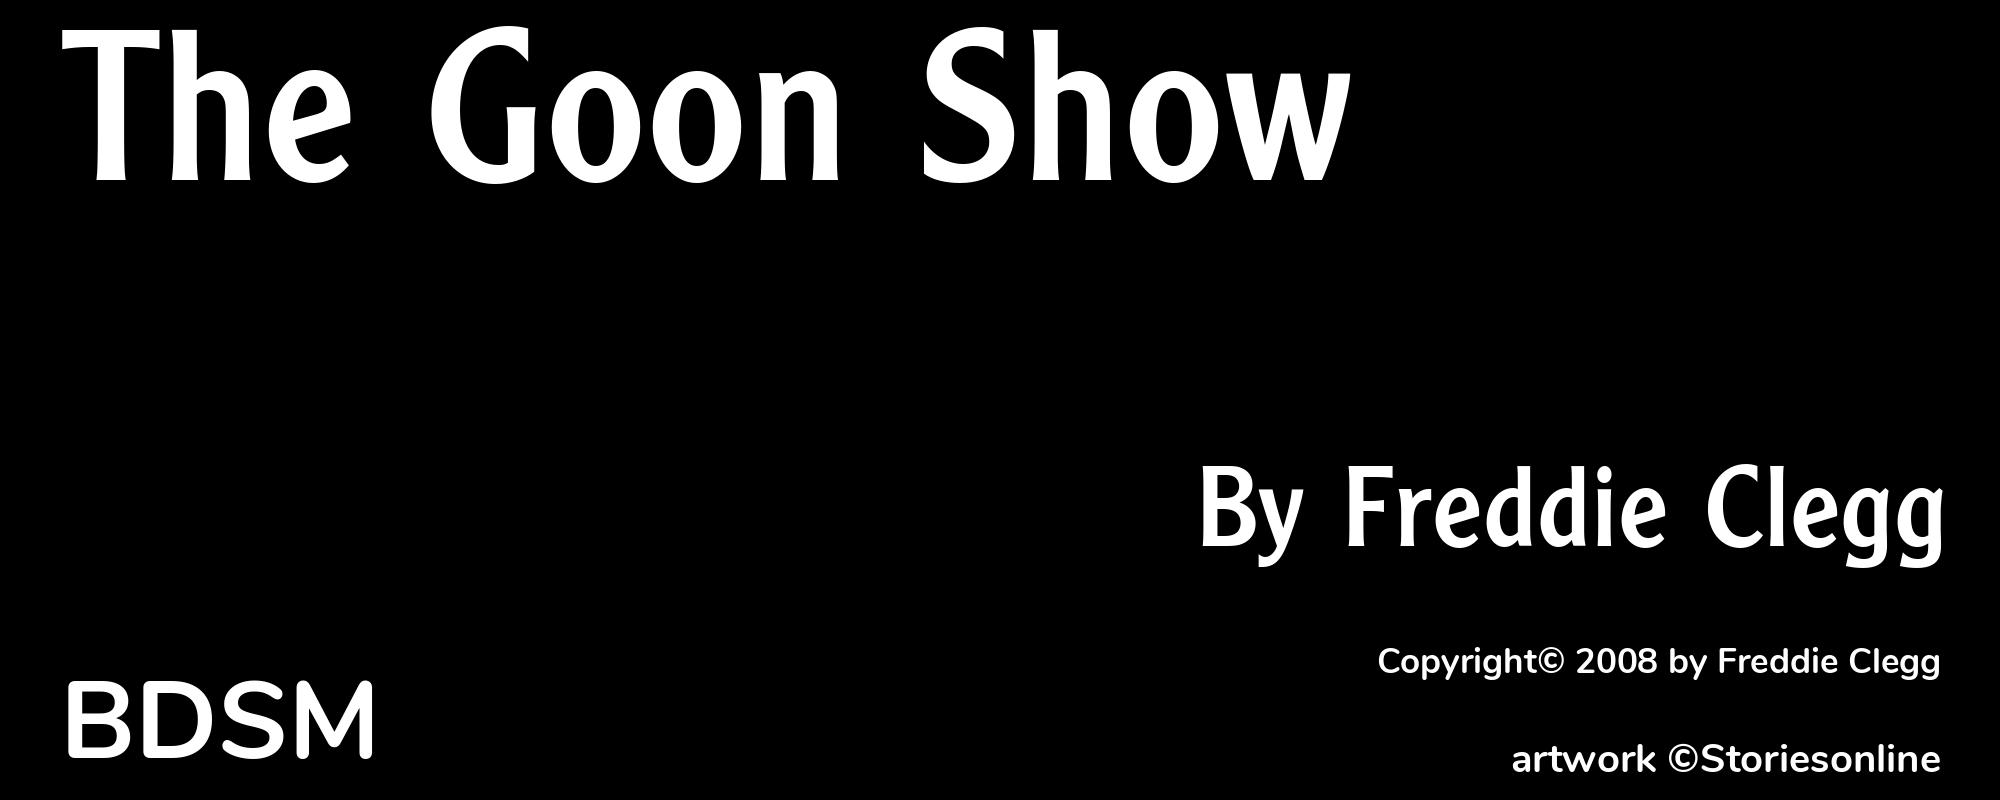 The Goon Show - Cover